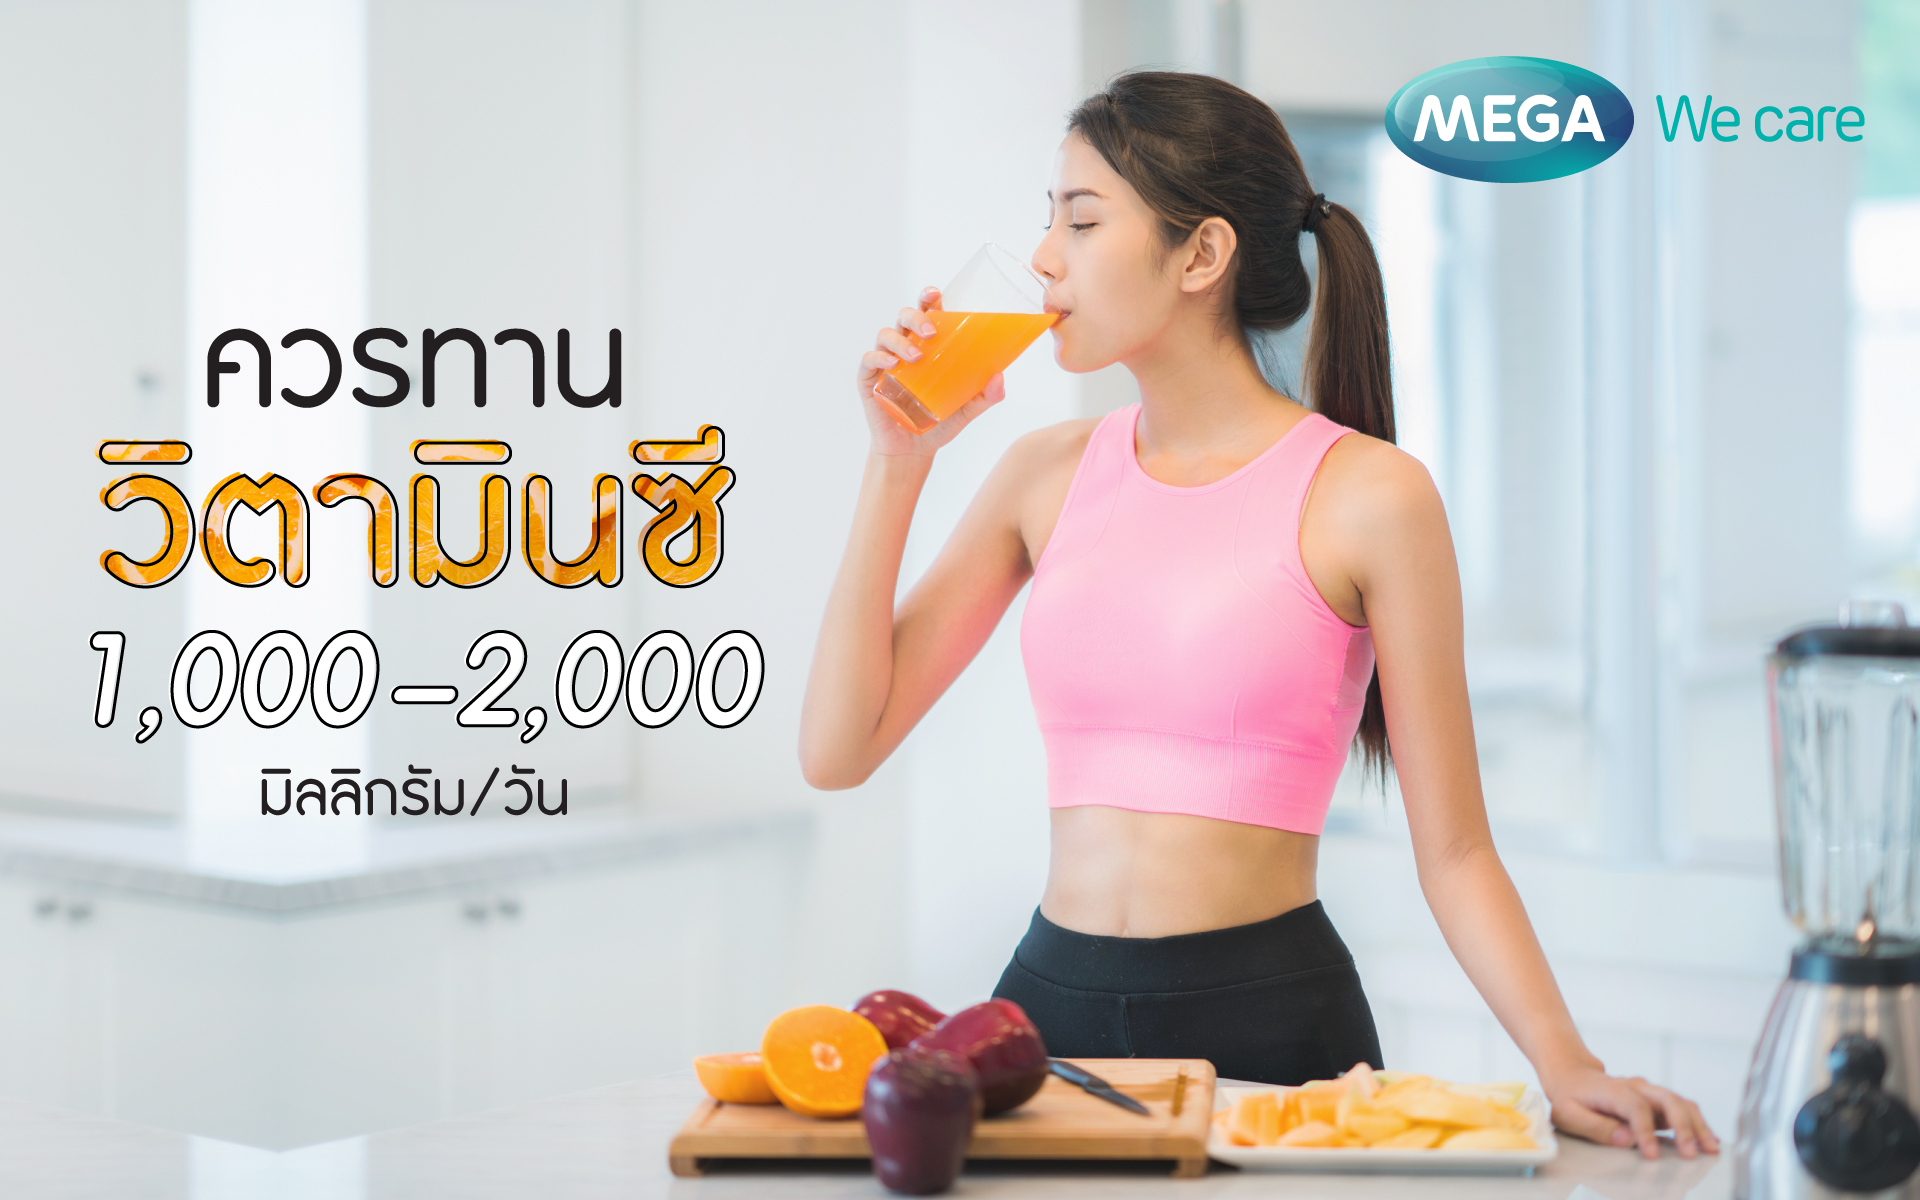 Woman-drink-orange-and-eat-fruits